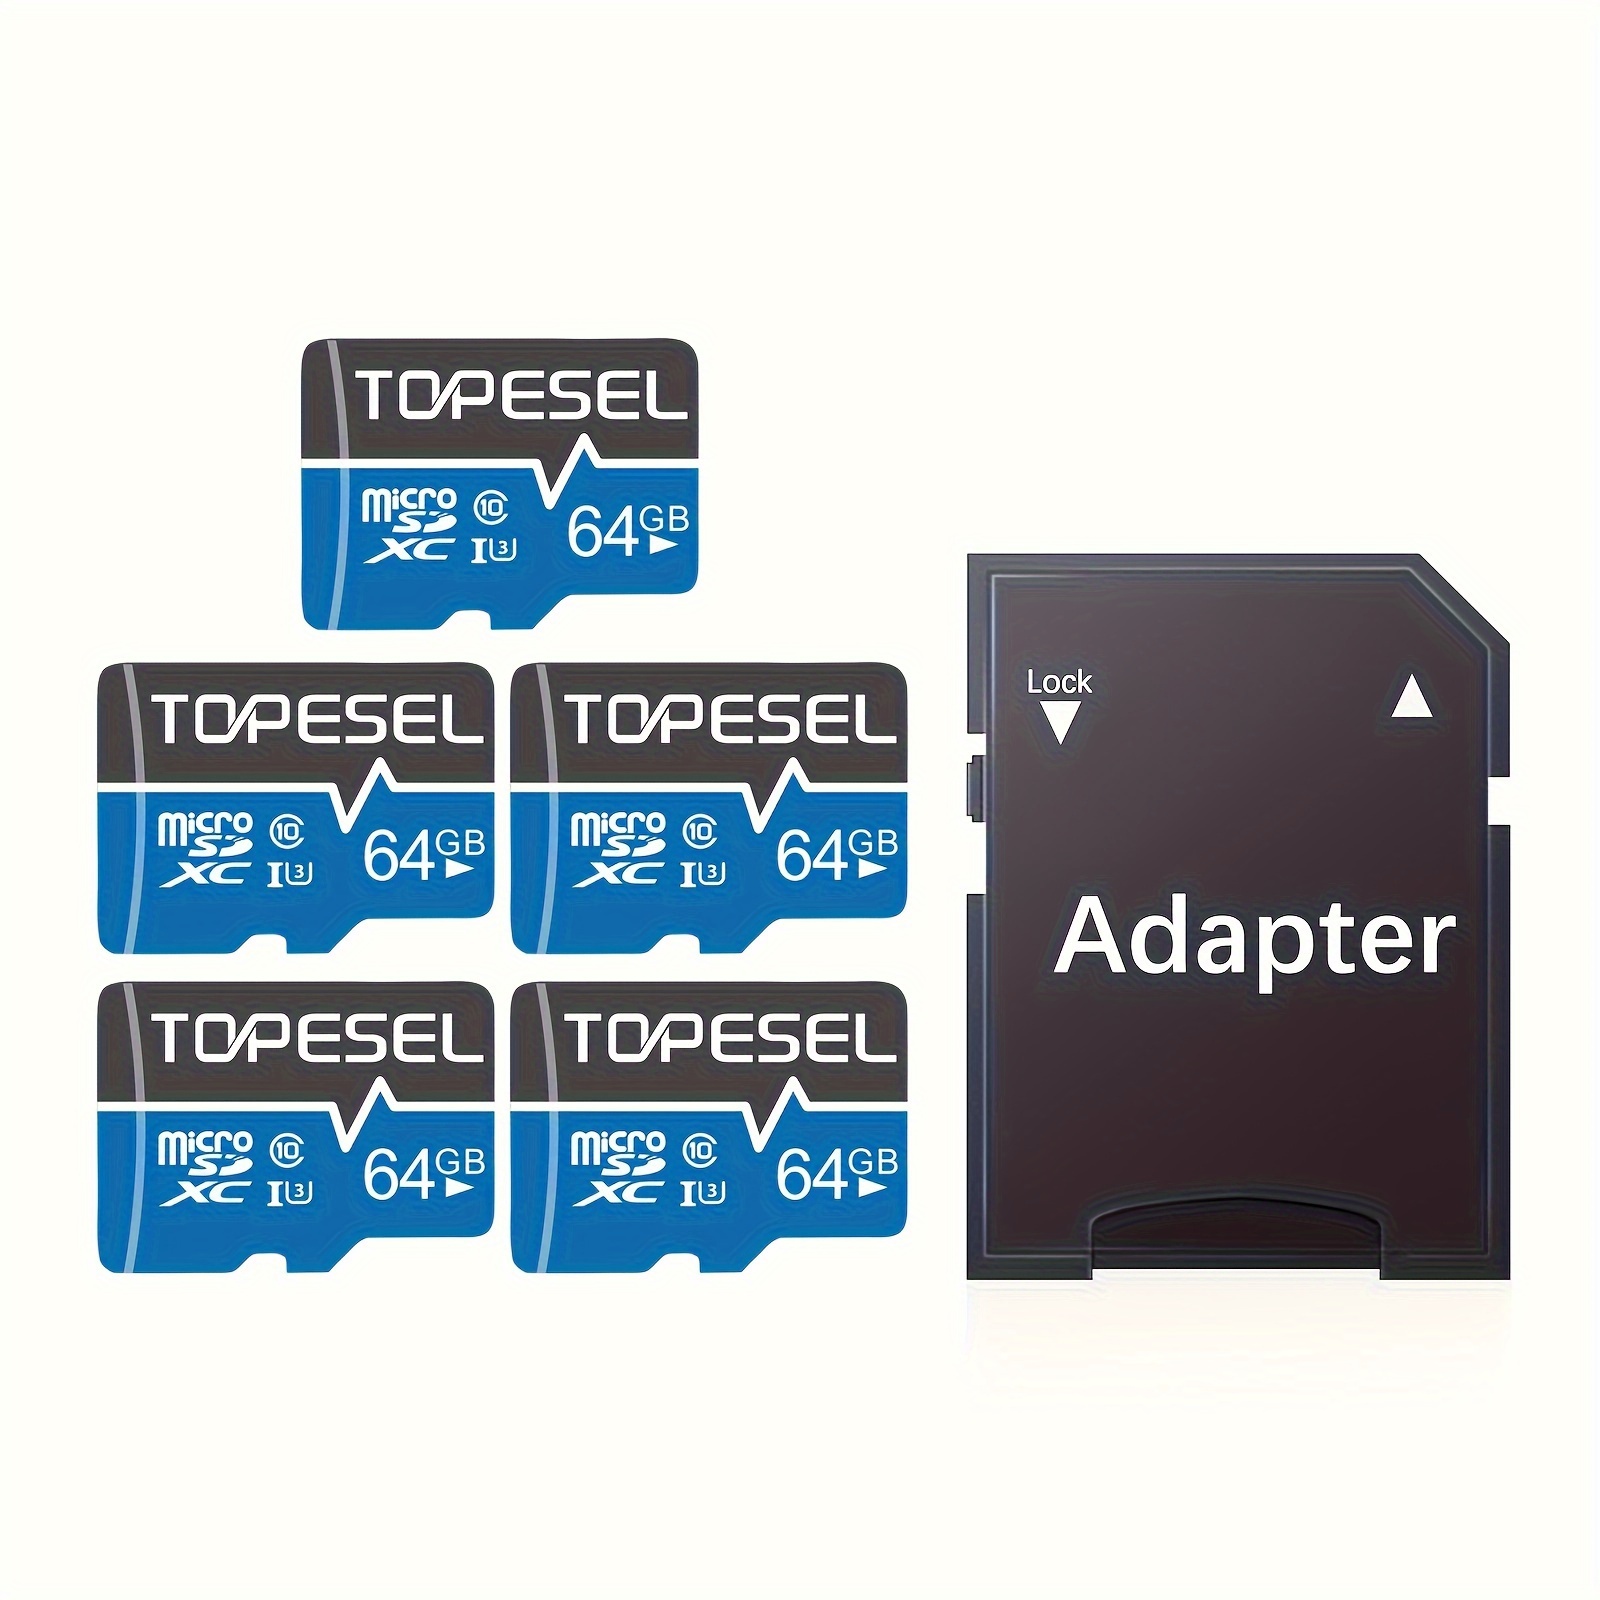 

Topesel 64gb Ultra High-speed Micro Tf Card - -fast Storage For Full Hd Video Capture - Compatible With Cameras, Android Phones, Tablets, Drones, Dash Cams